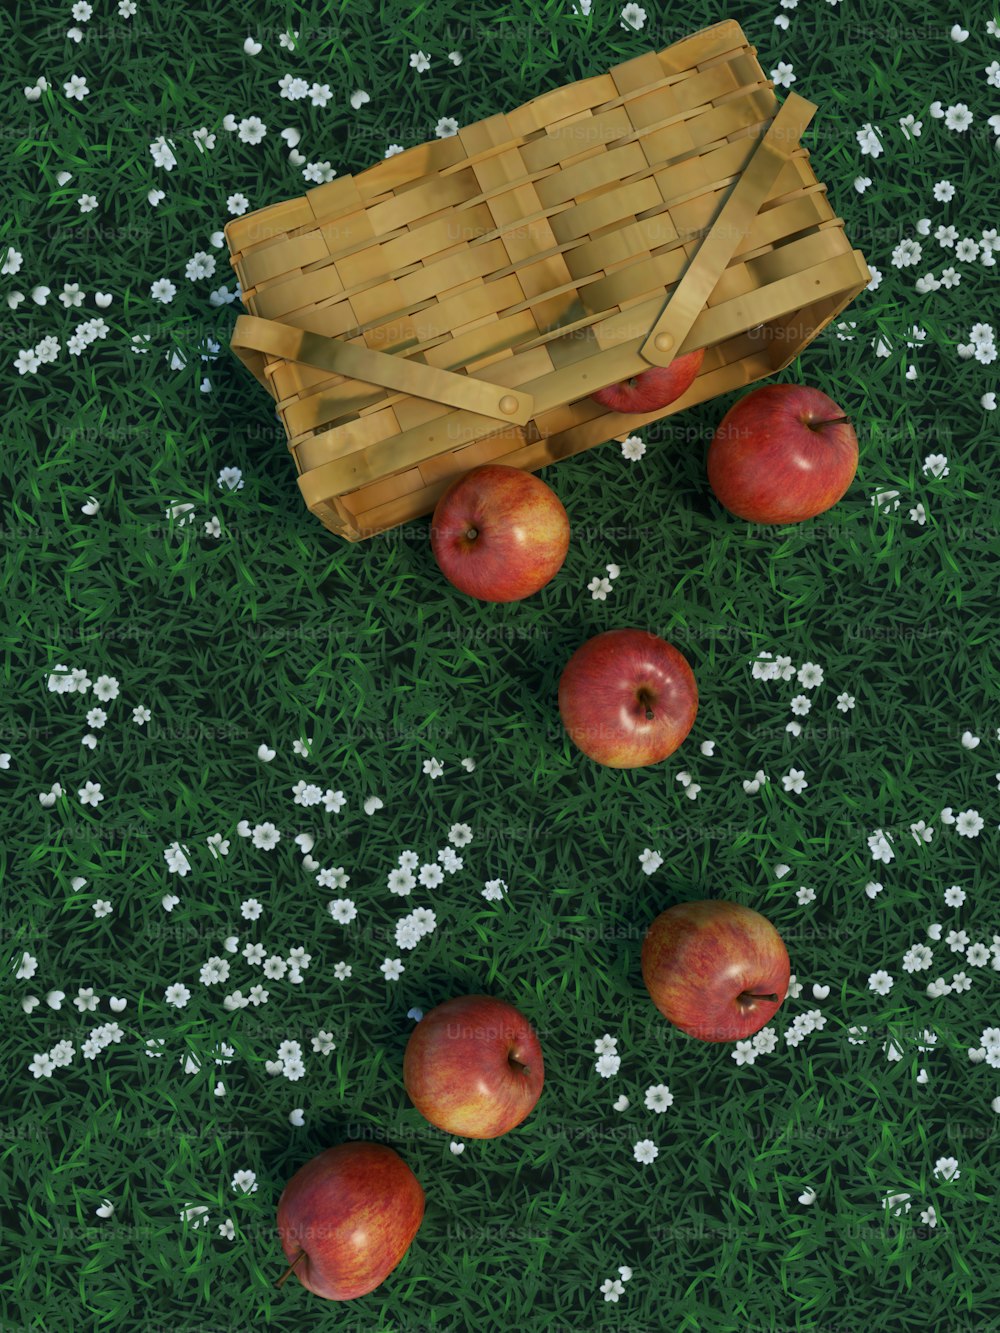 a basket of apples on a green grass